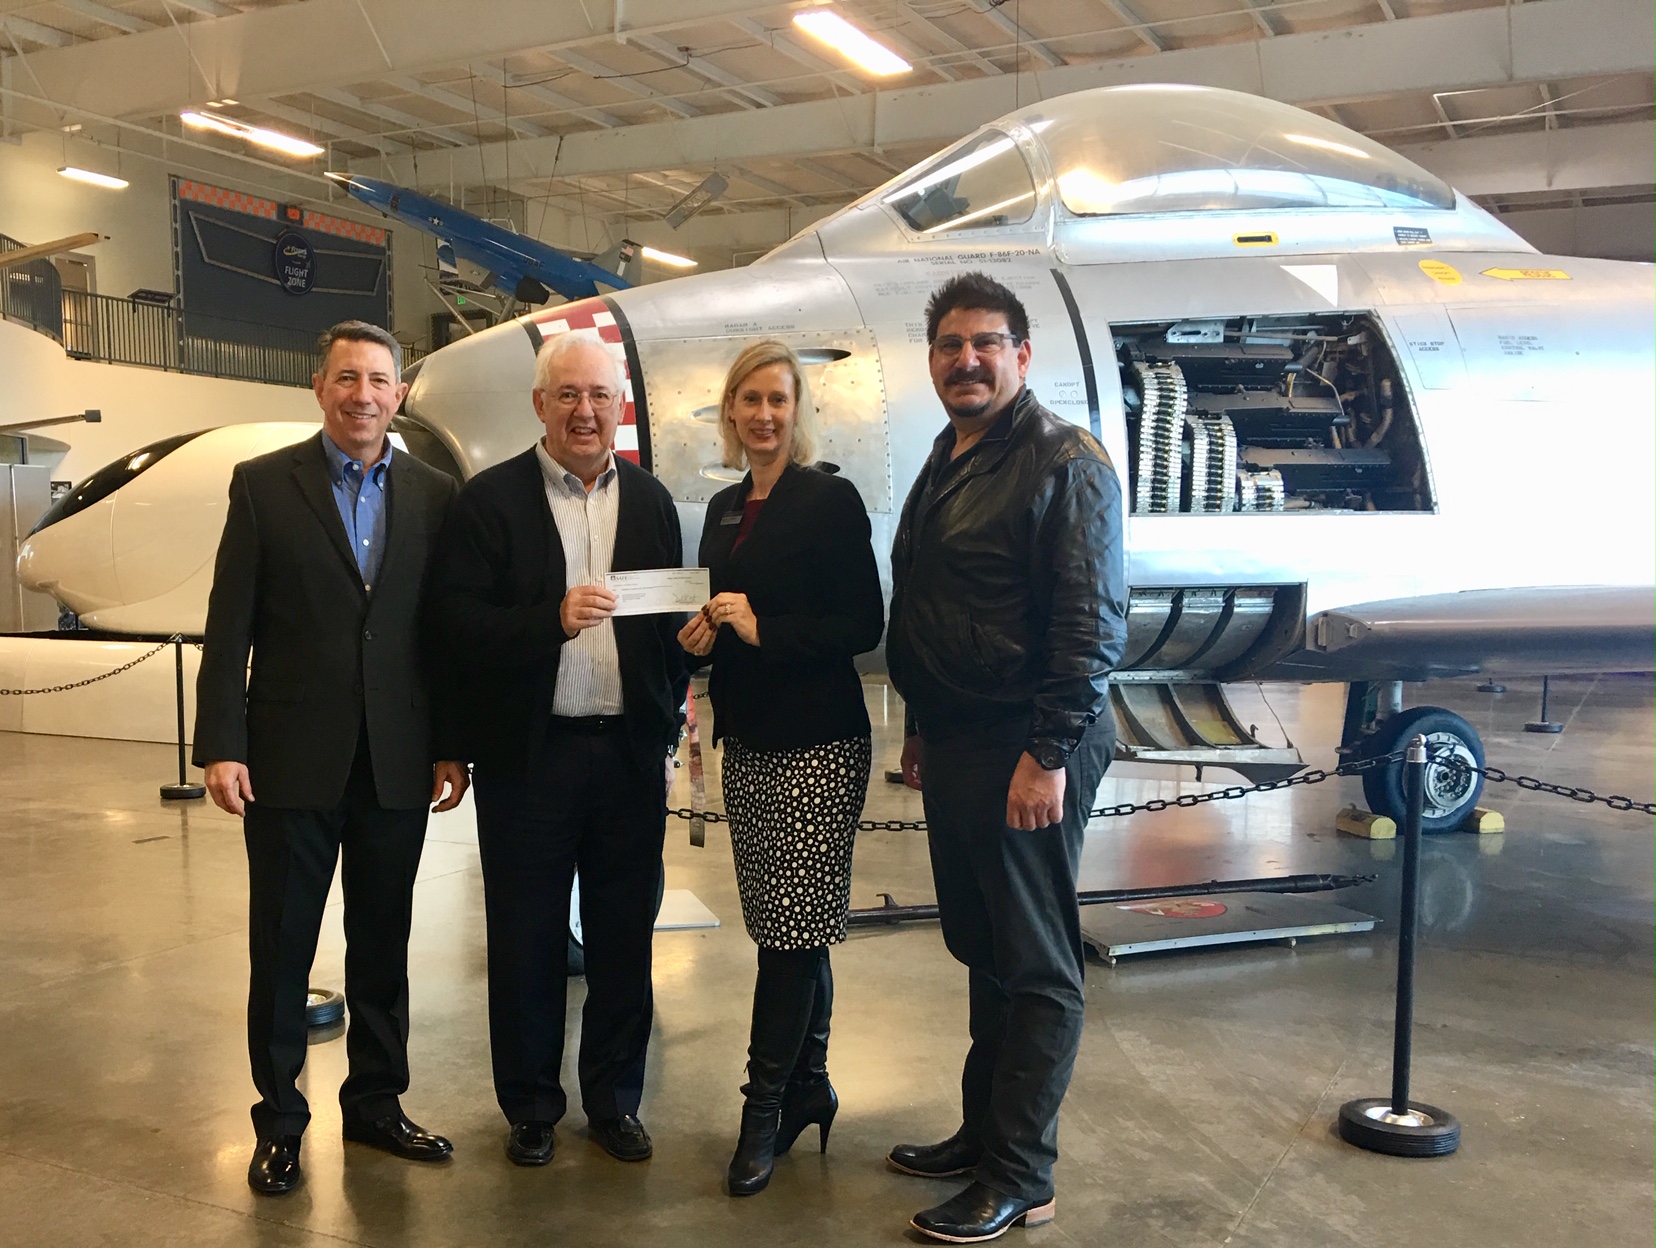 Aerospace Museum Executive Director Tom Jones, Aerospace Museum Board Chair Larry Miles, SAFE Credit Union AVP and Aerospace Board Member Melissa Bittman, and Sacramento County Board Supervisor Phil Serna pose with a $25,000 donation from SAFE to go toward the Aerospace Museum’s STEM education efforts.